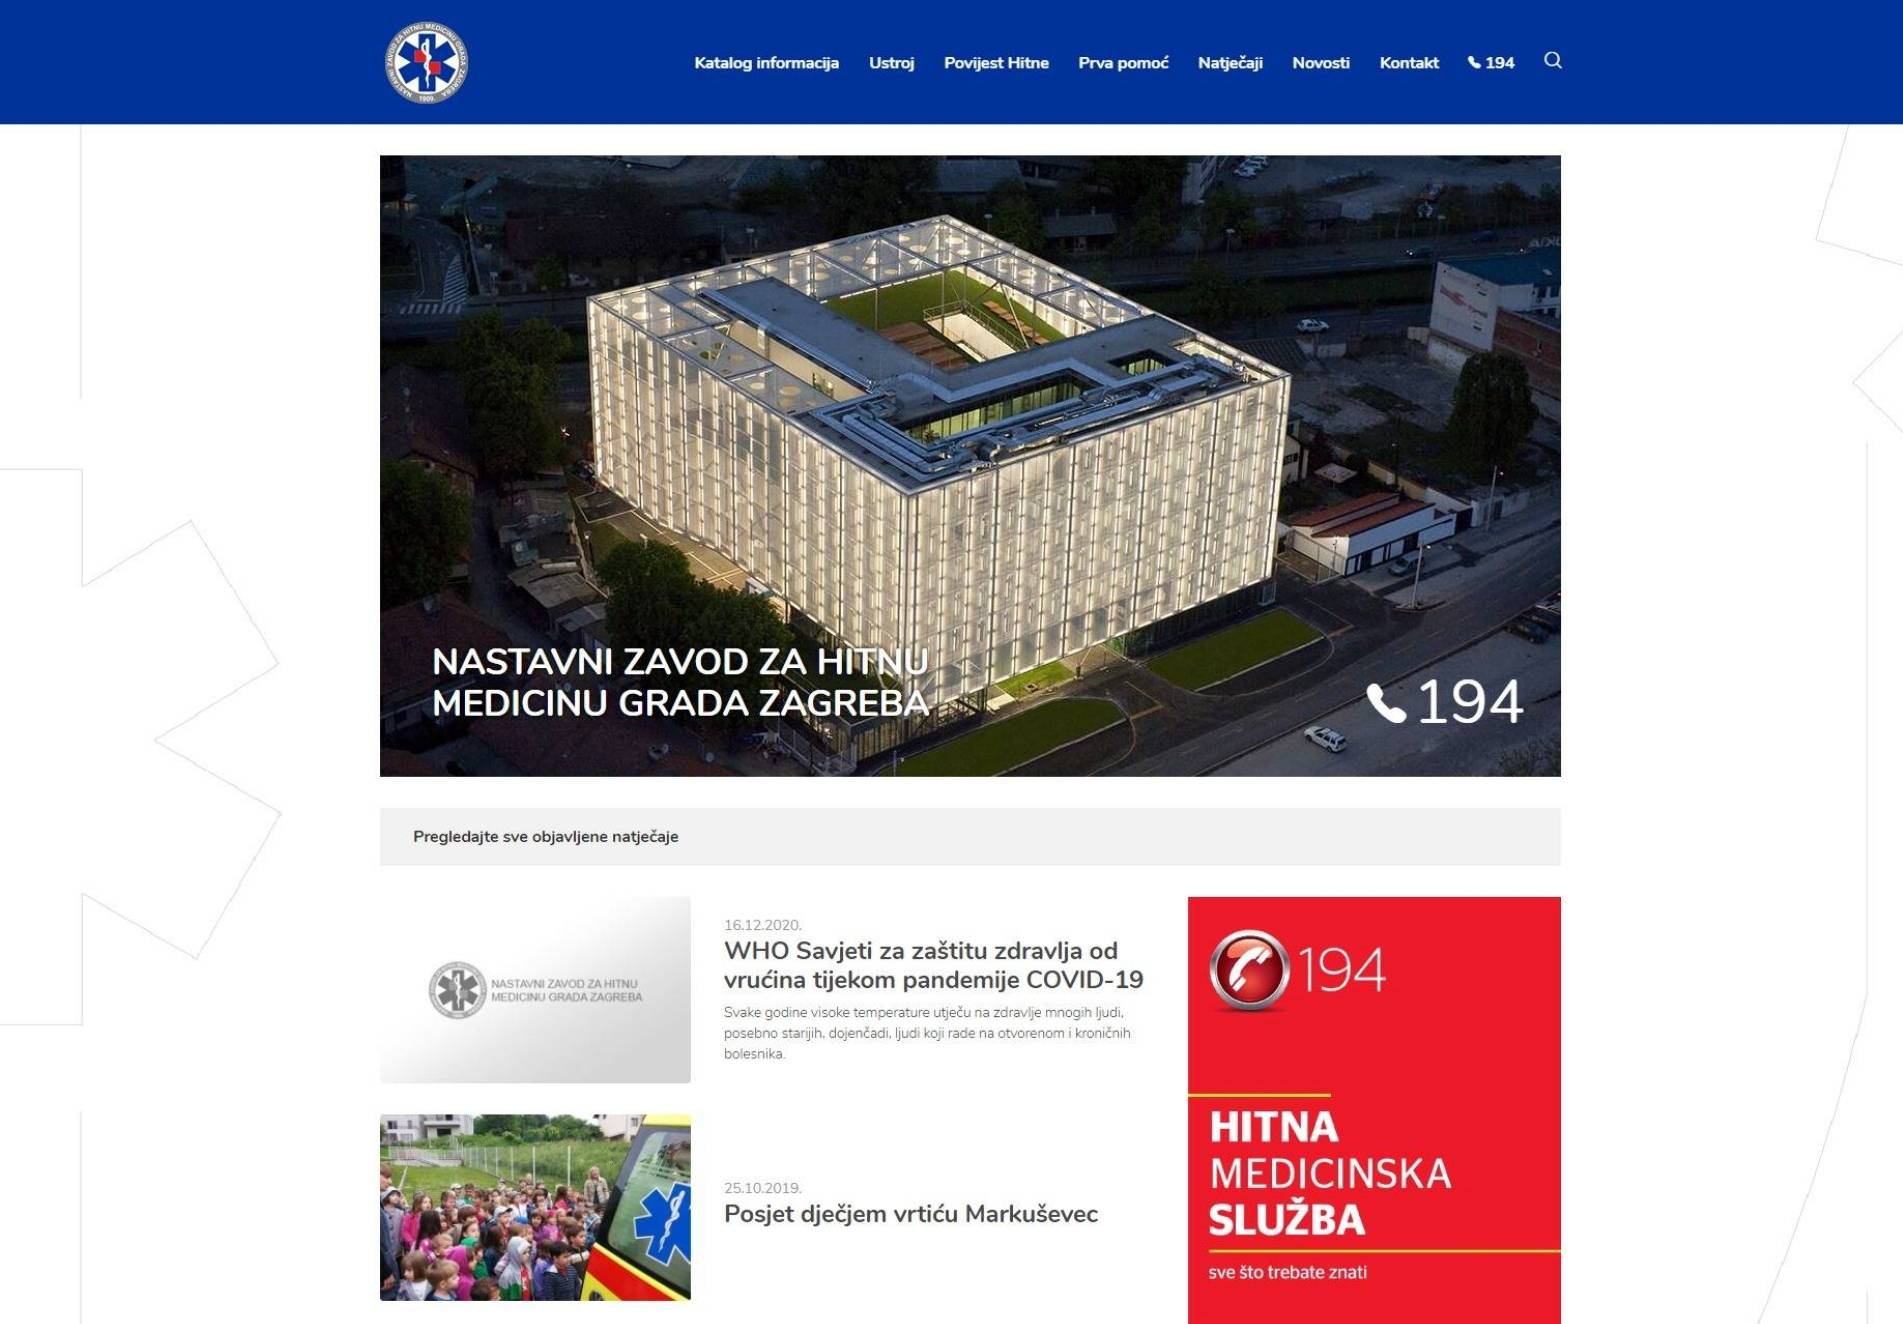 The Institute for Emergency Medicine of the City of Zagreb